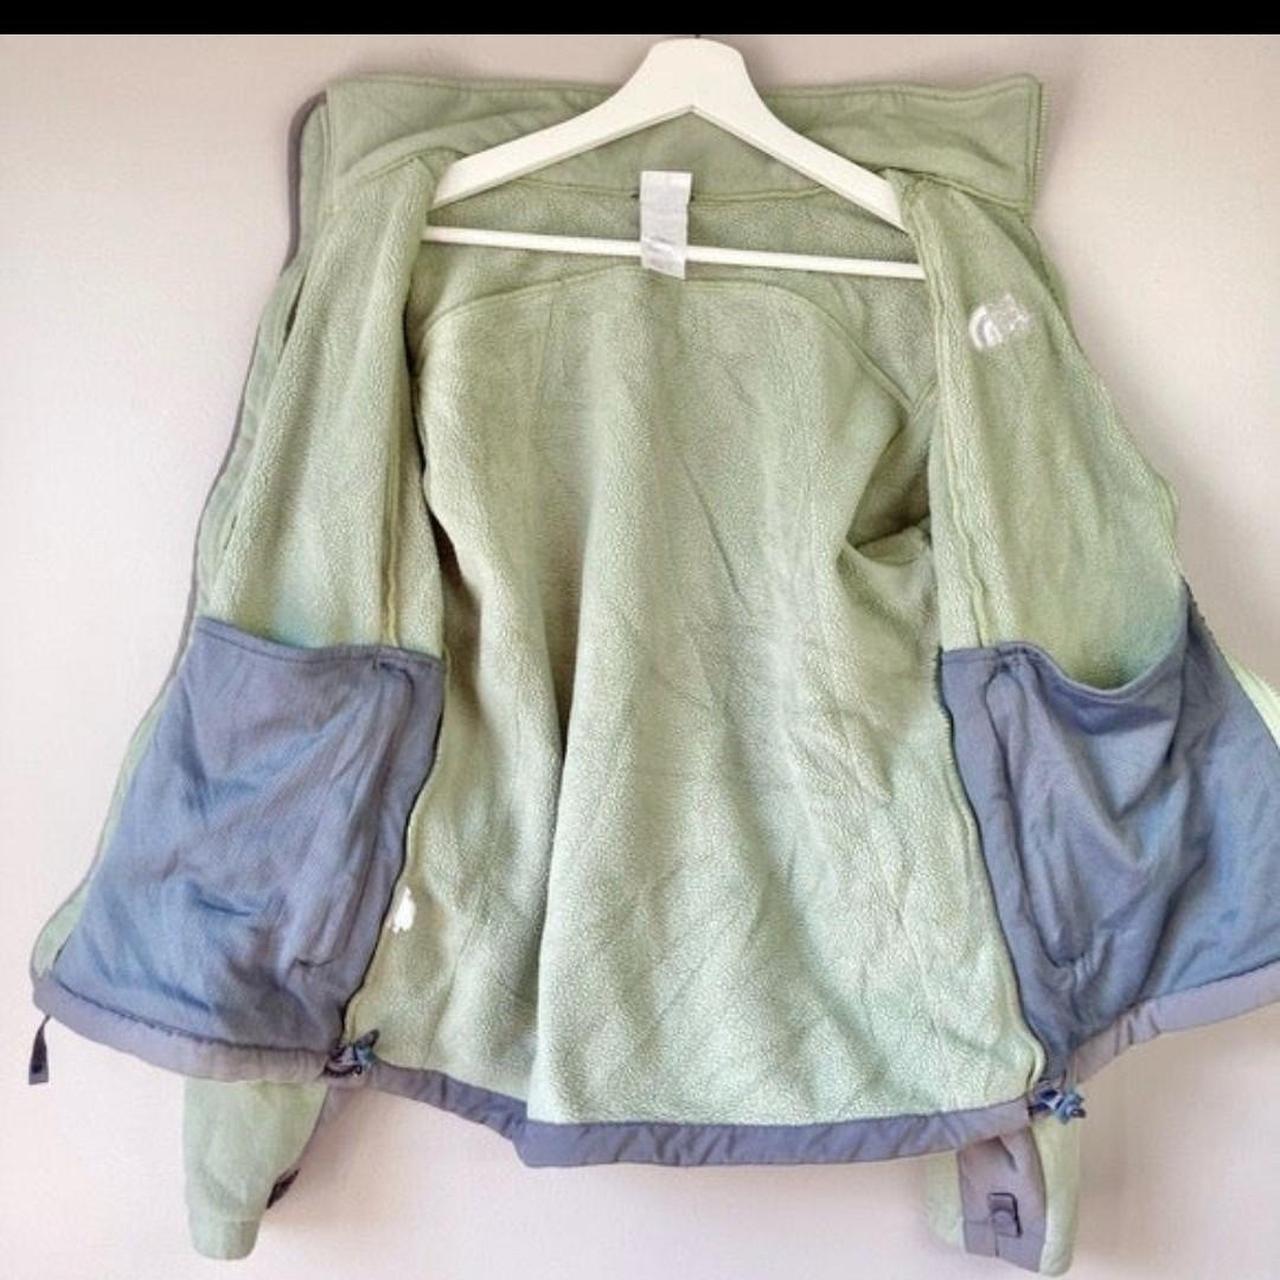 The North Face Women's Green and Grey Jacket (3)